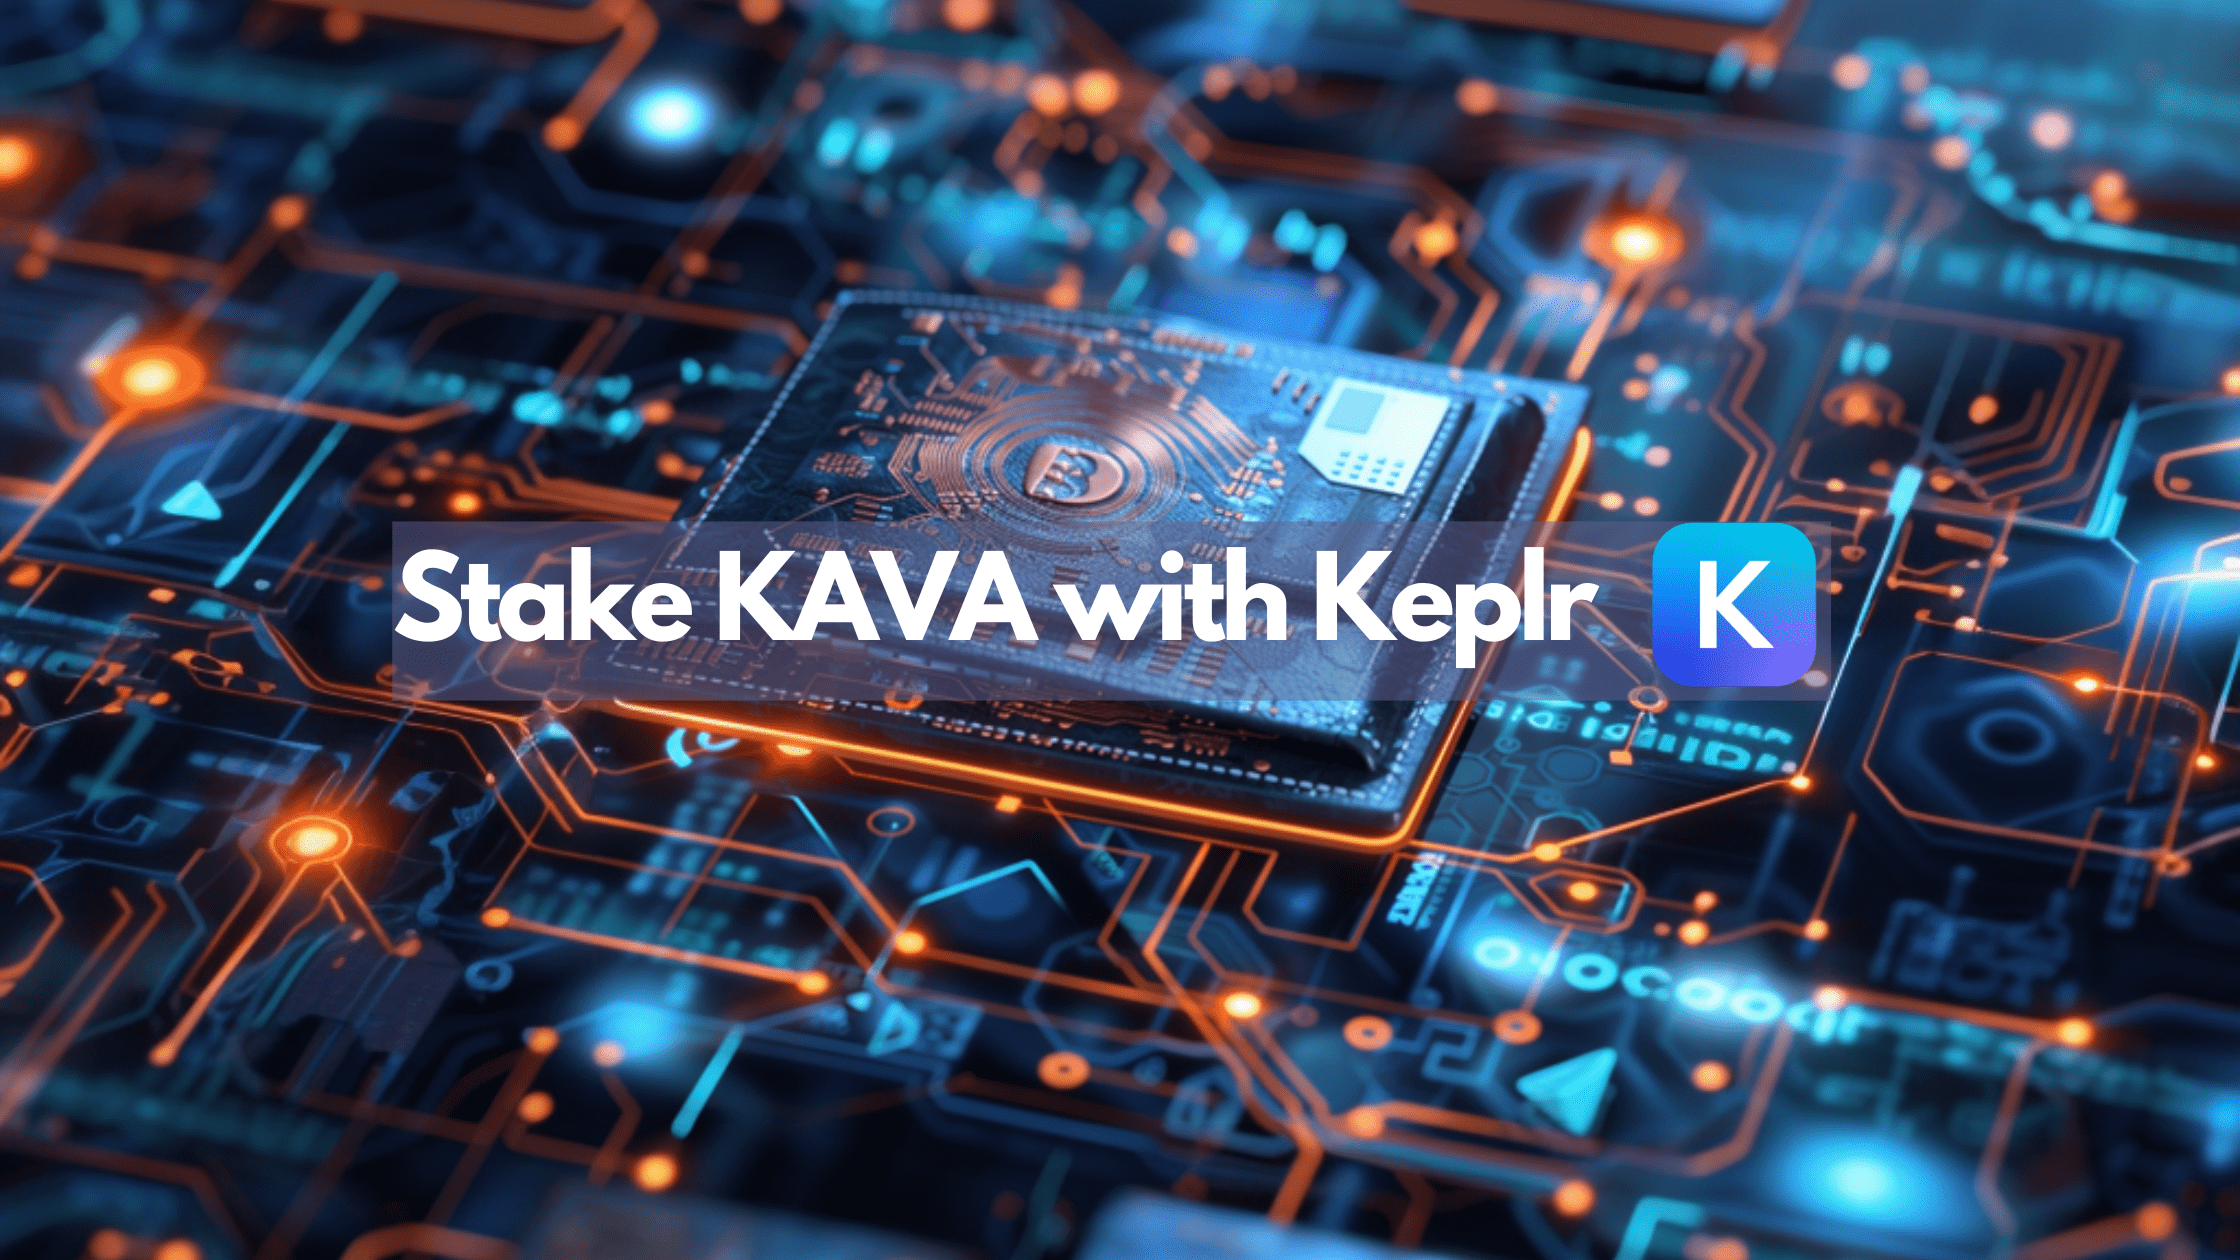 how do you stake KAVA on Keplr, how do you stake on Keplr, is Kava staking worth it, Is KAVA good for staking, KAVA staking APY, What is the reward for KAVA staking, Is KAVA staking on the Kava blockchain or Ethereum,, Keplr wallet staking guide, KAVA EVM staking with Keplr Wallet, KAVA staking rewards calculator, How to delegate KAVA tokens, Is KAVA Proof of Stake, Does Keplr wallet support KAVA, Trading KAVA on Keplr wallet, How to add KAVA to Keplr wallet, KAVA liquid staking, What wallets support KAVA, Best place to stake KAVA, How long does it take to unstake KAVA, How does KAVA staking work, Should I stake KAVA on Kraken, Should I stake KAVA on Binance, Is KAVA staking legit, which KAVA validator do I choose, Which KAVA validator should I stake with, where to stake KAVA, the best place to stake KAVA, KAVA rise, Kava USDT, Why is staking KAVA a good idea, Can I restake KAVA